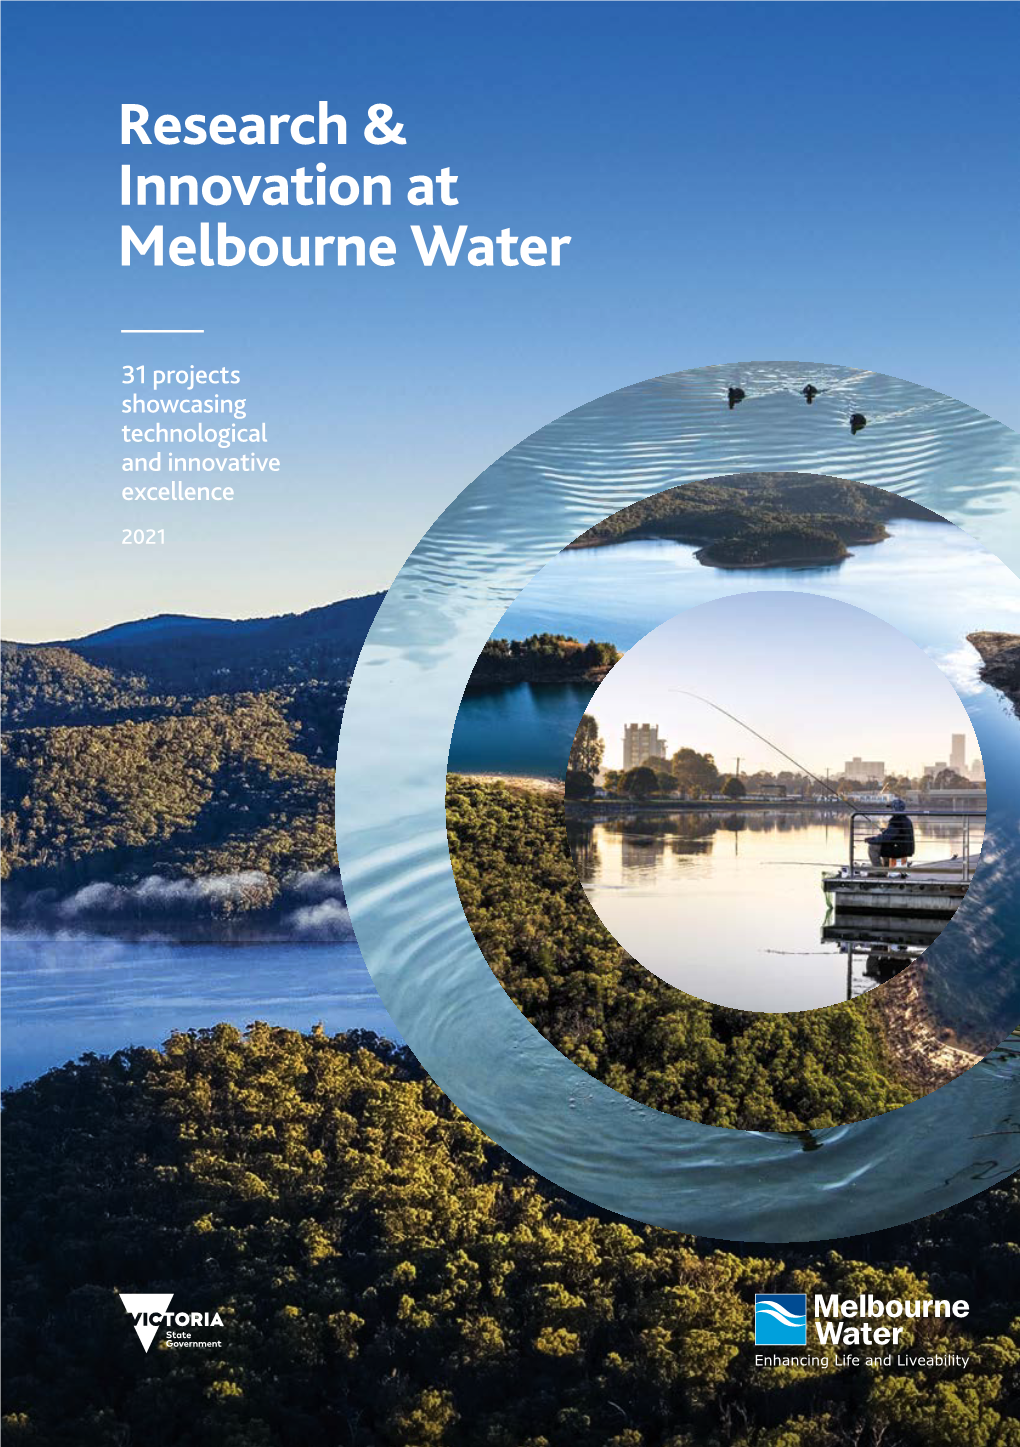 Research & Innovation at Melbourne Water